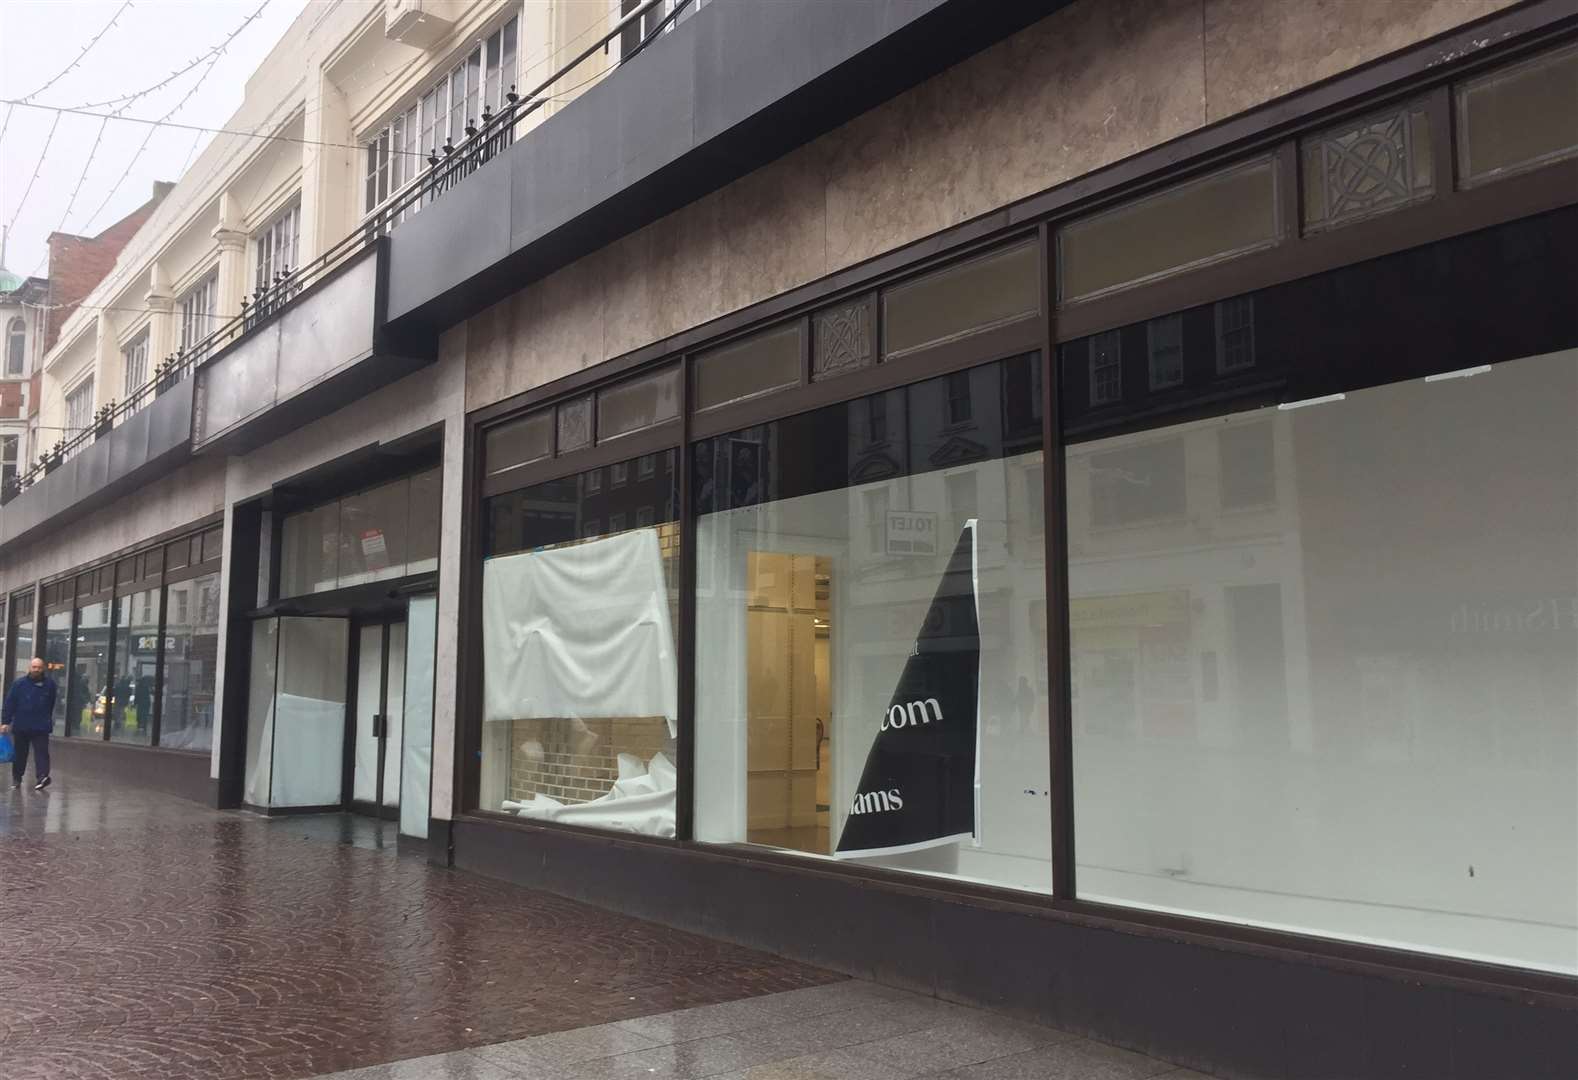 A sorry state - fallen down signs at Folkestone's Debenhams are to be replaced with a new display